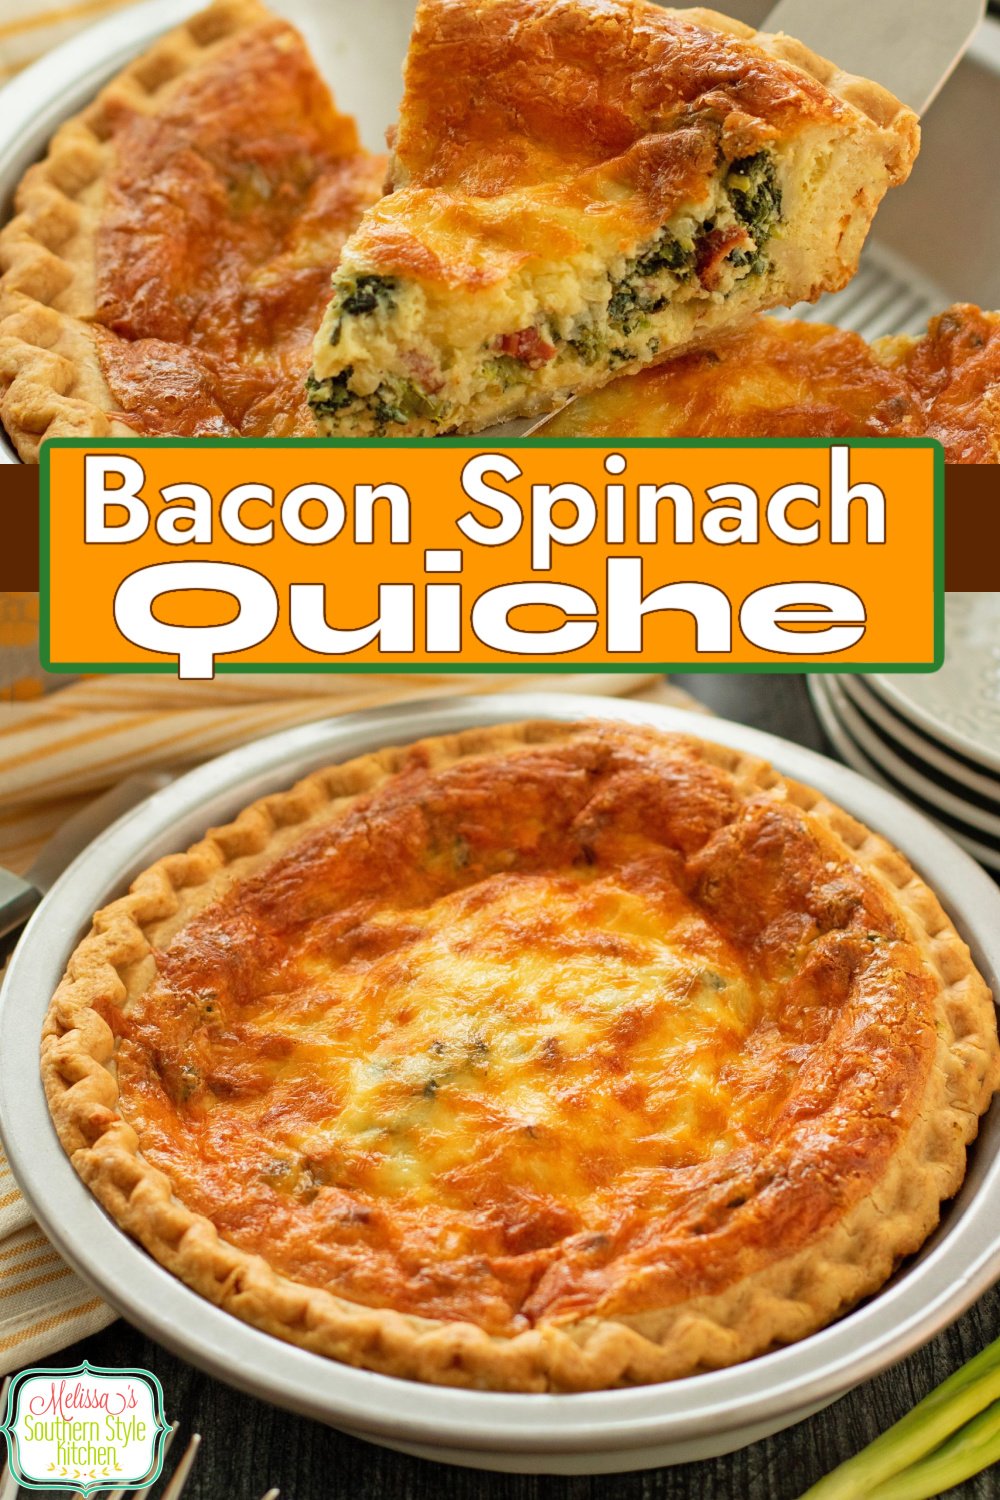 This easy Bacon Spinach Quiche recipe is ideal for weekend brunches and special holiday gatherings #quicherecipes #spinachquiche #baconquiche #baconspinachquiche #brunchrecipes #baconrecipes #easyquicherecipes via @melissasssk